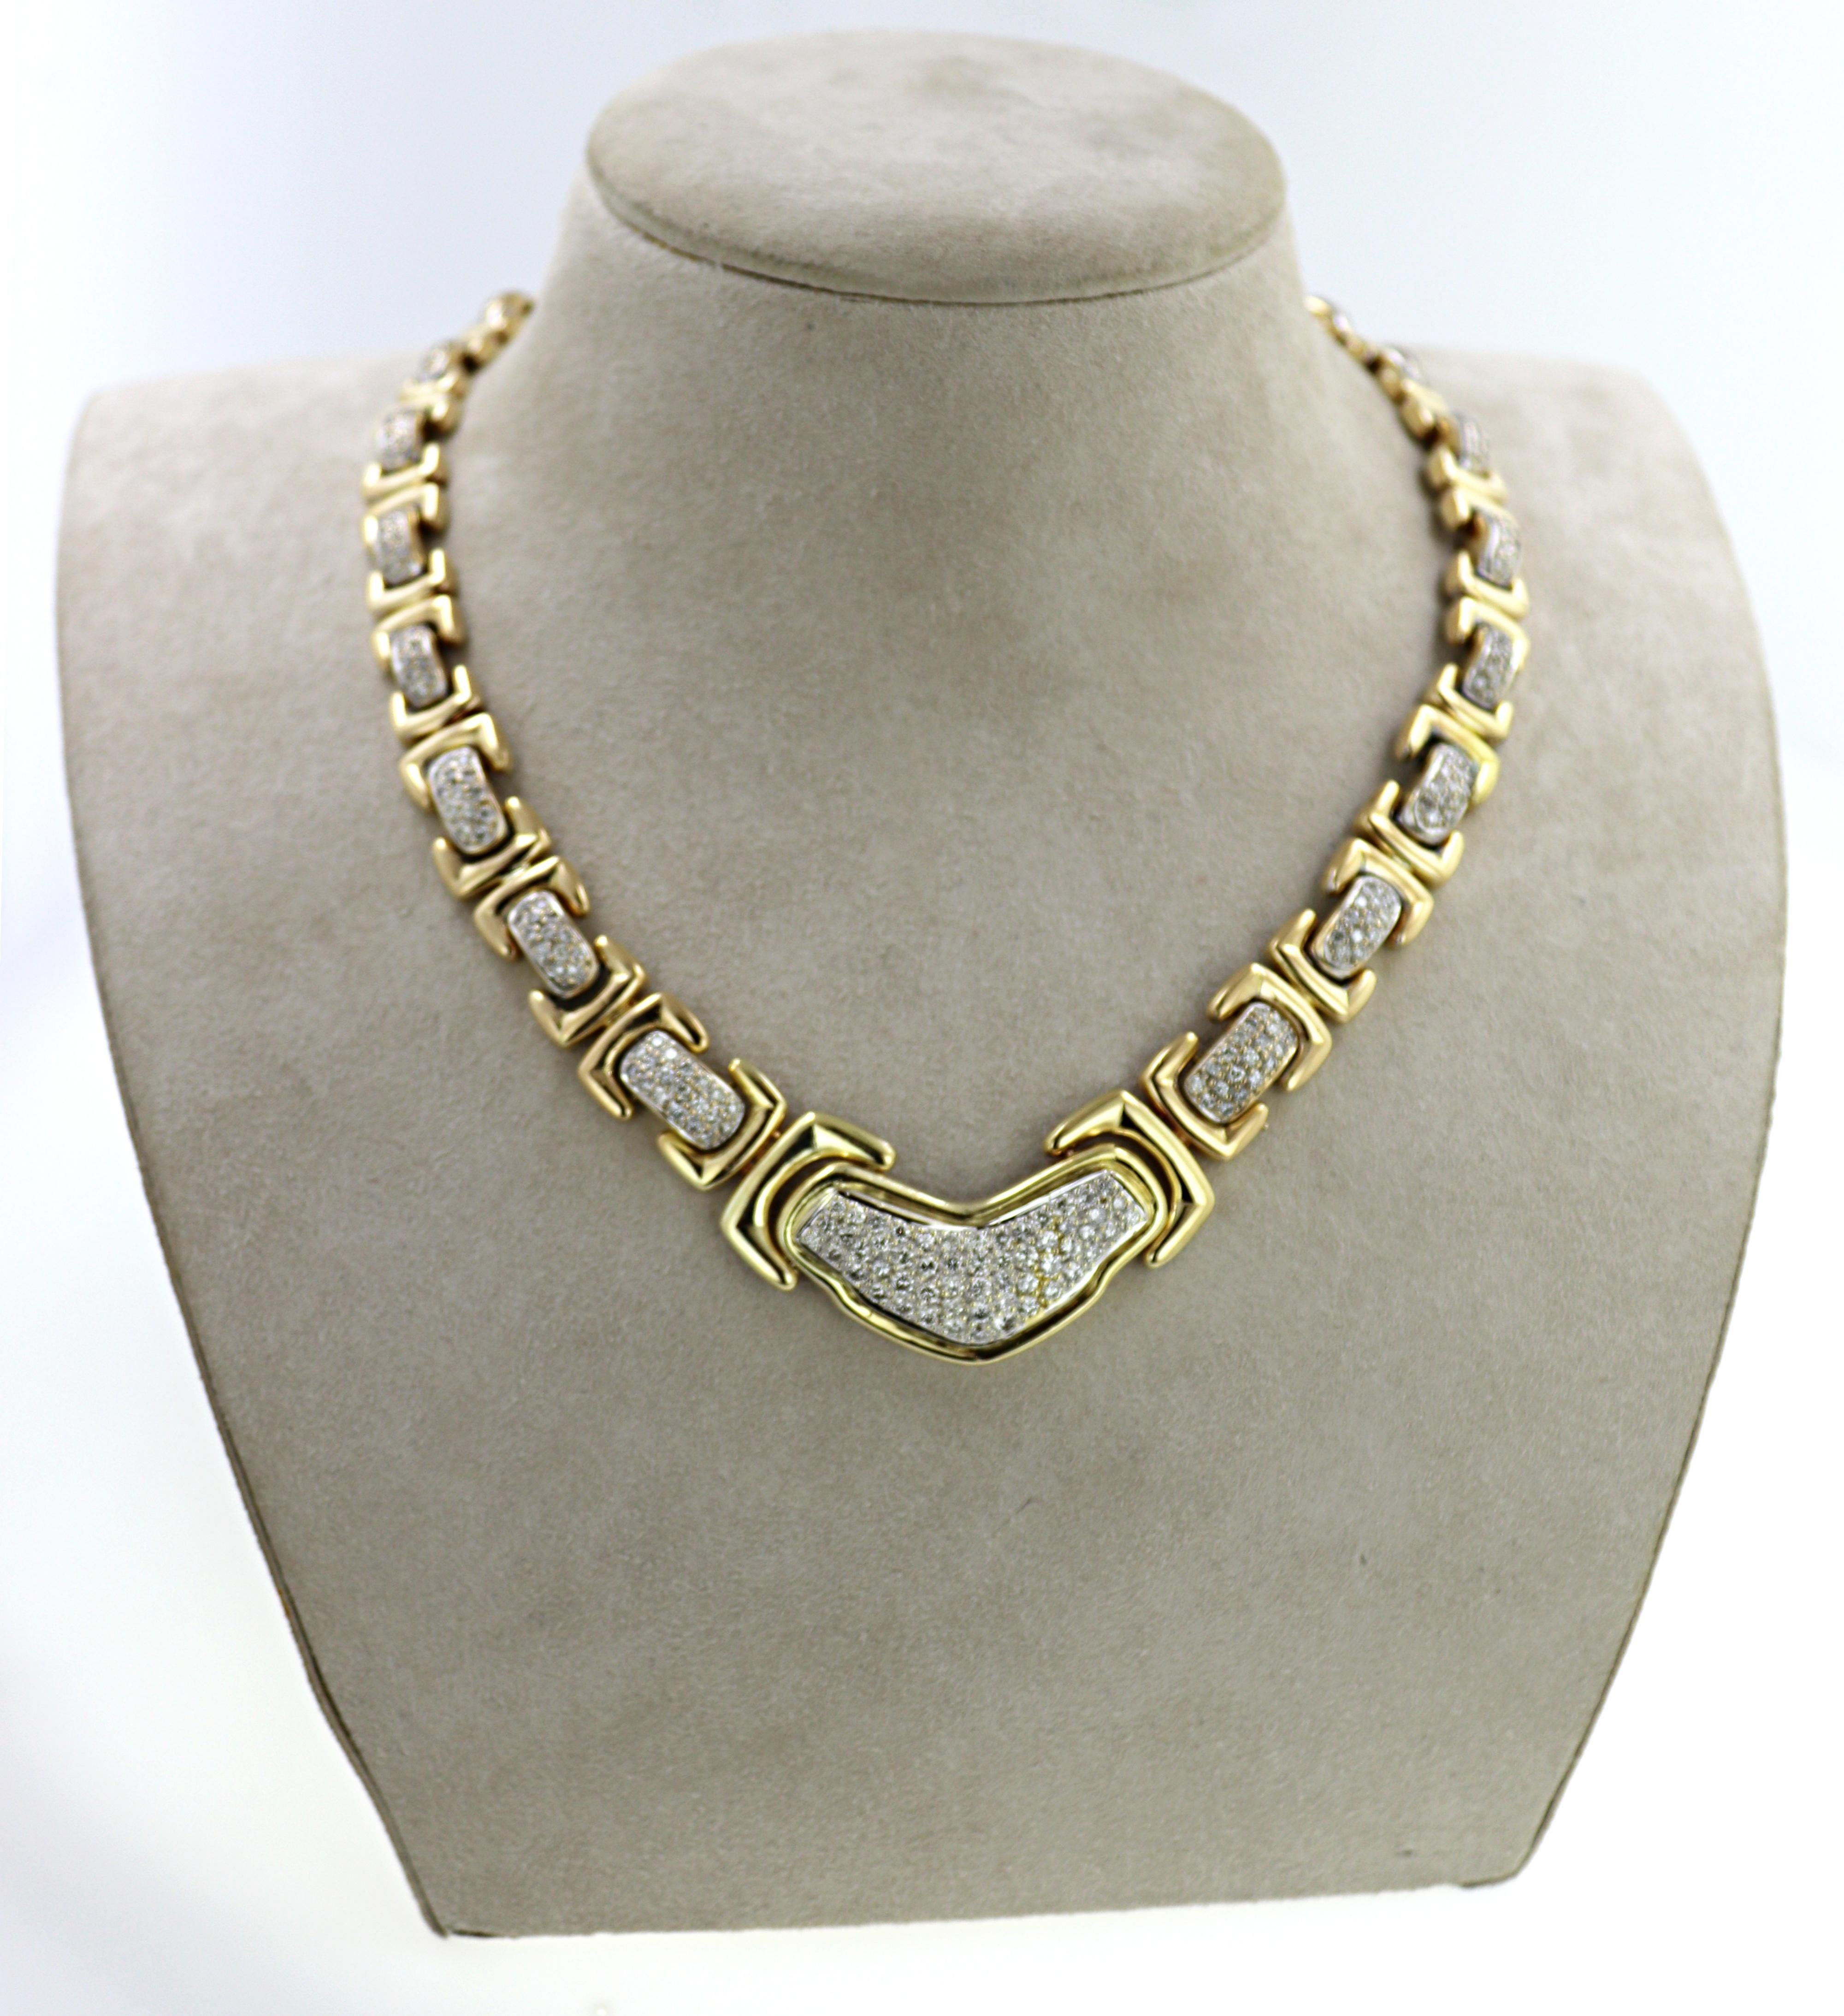 Featuring 300 full-cut diamonds, 4.75 cts. tw., bead set in an 18k yellow gold tapering
articulated buckle style link mounting, 15.2 mm to 3.7 mm, completed by a tongue and groove
clasp, with figure eight safety, forming a 16-inch necklace, Gross